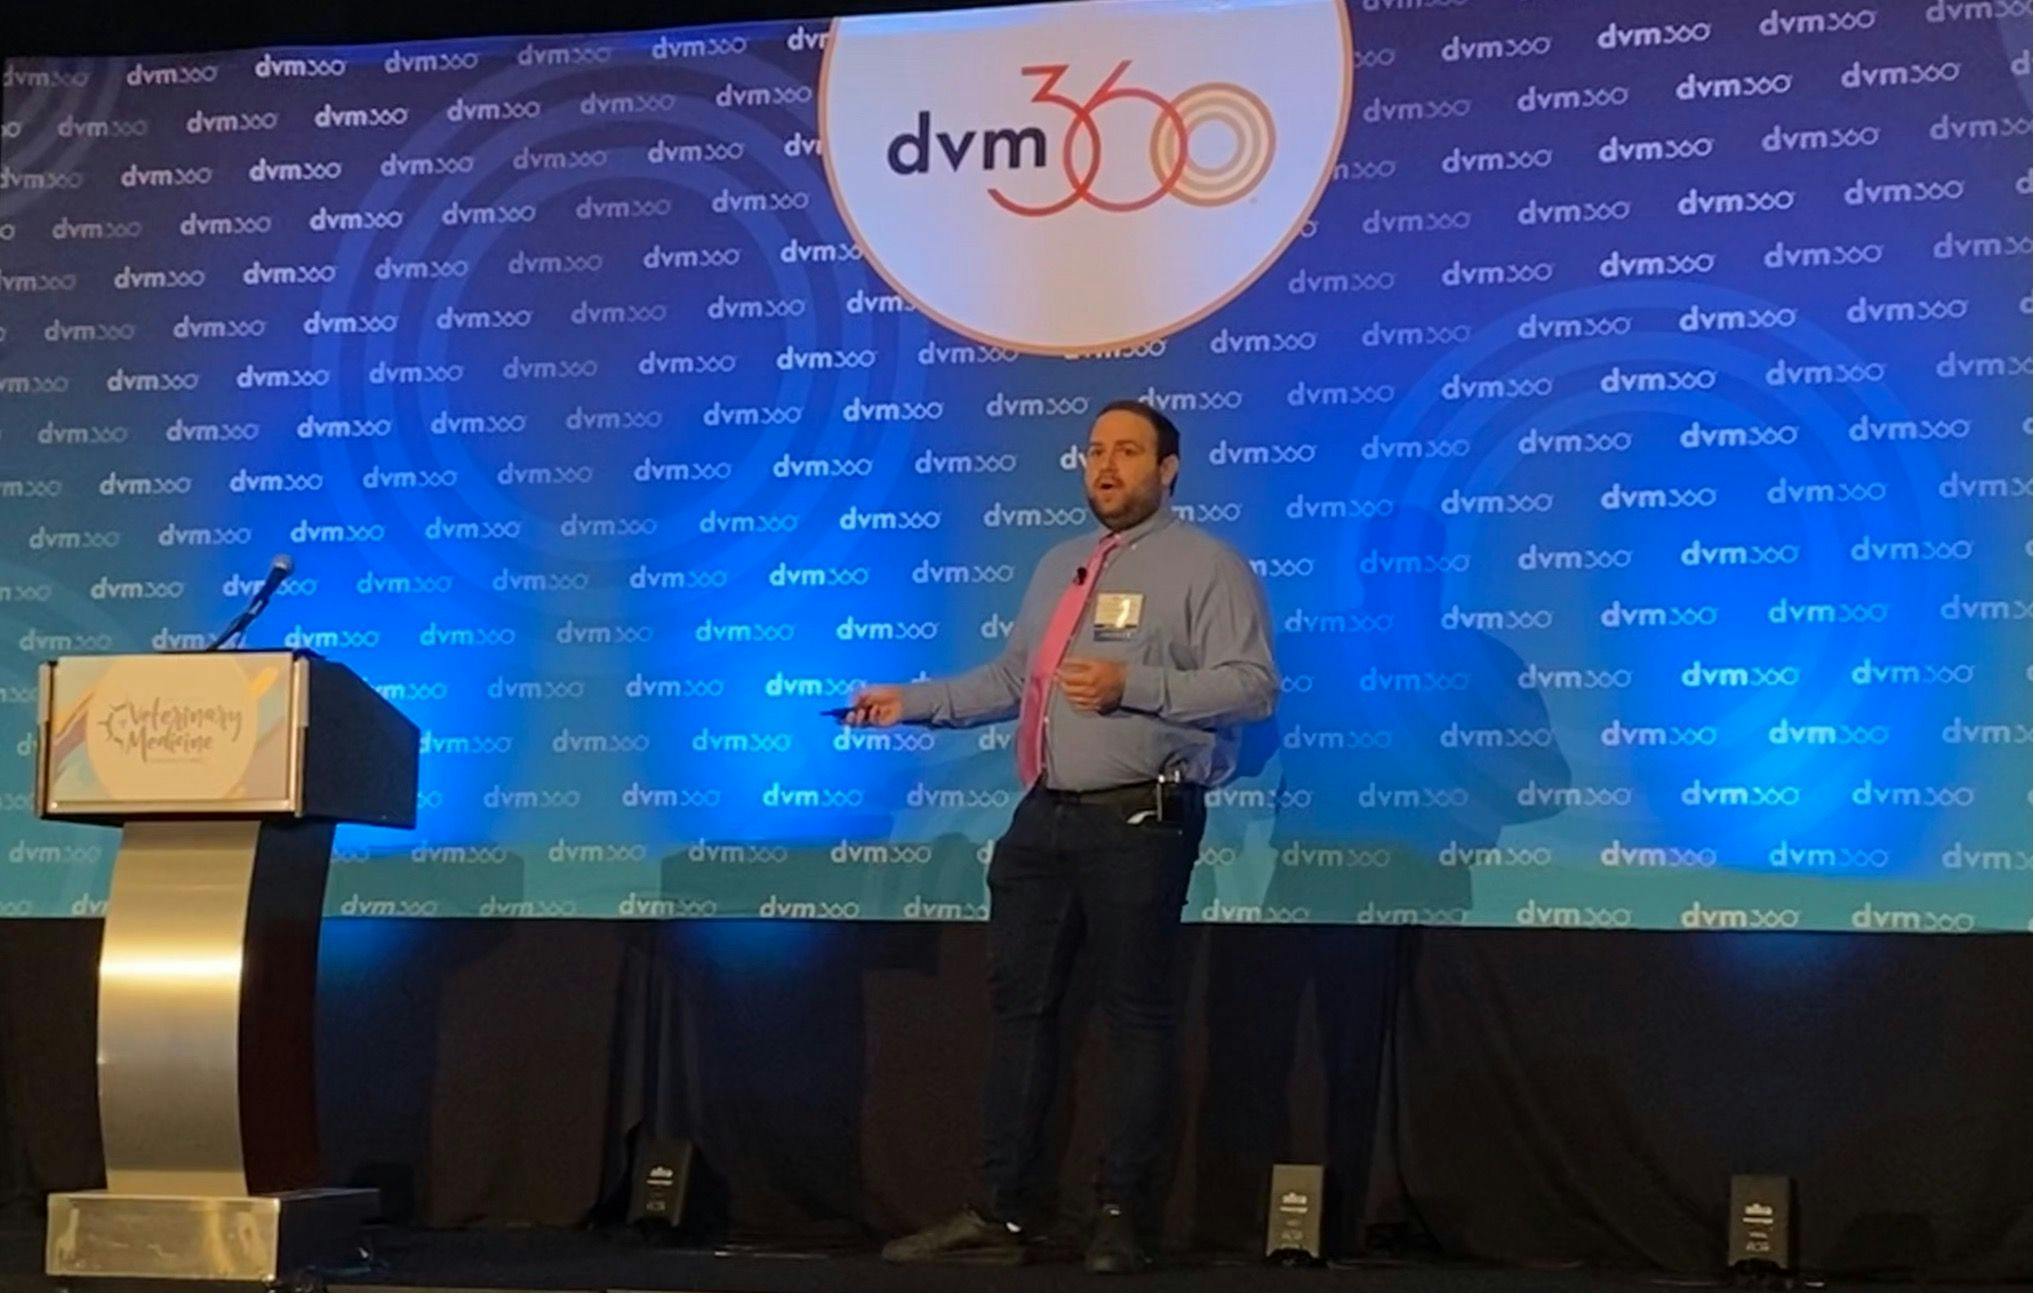 Credit: Sydney Yankowicz/dvm360®

Gianluca Bini, DVM, MRCVS, DACVAA, assistant professor of anesthesiology and pain management at The Ohio State University, presenting at the dvm360® Directions in Veterinary Medicine Conference.